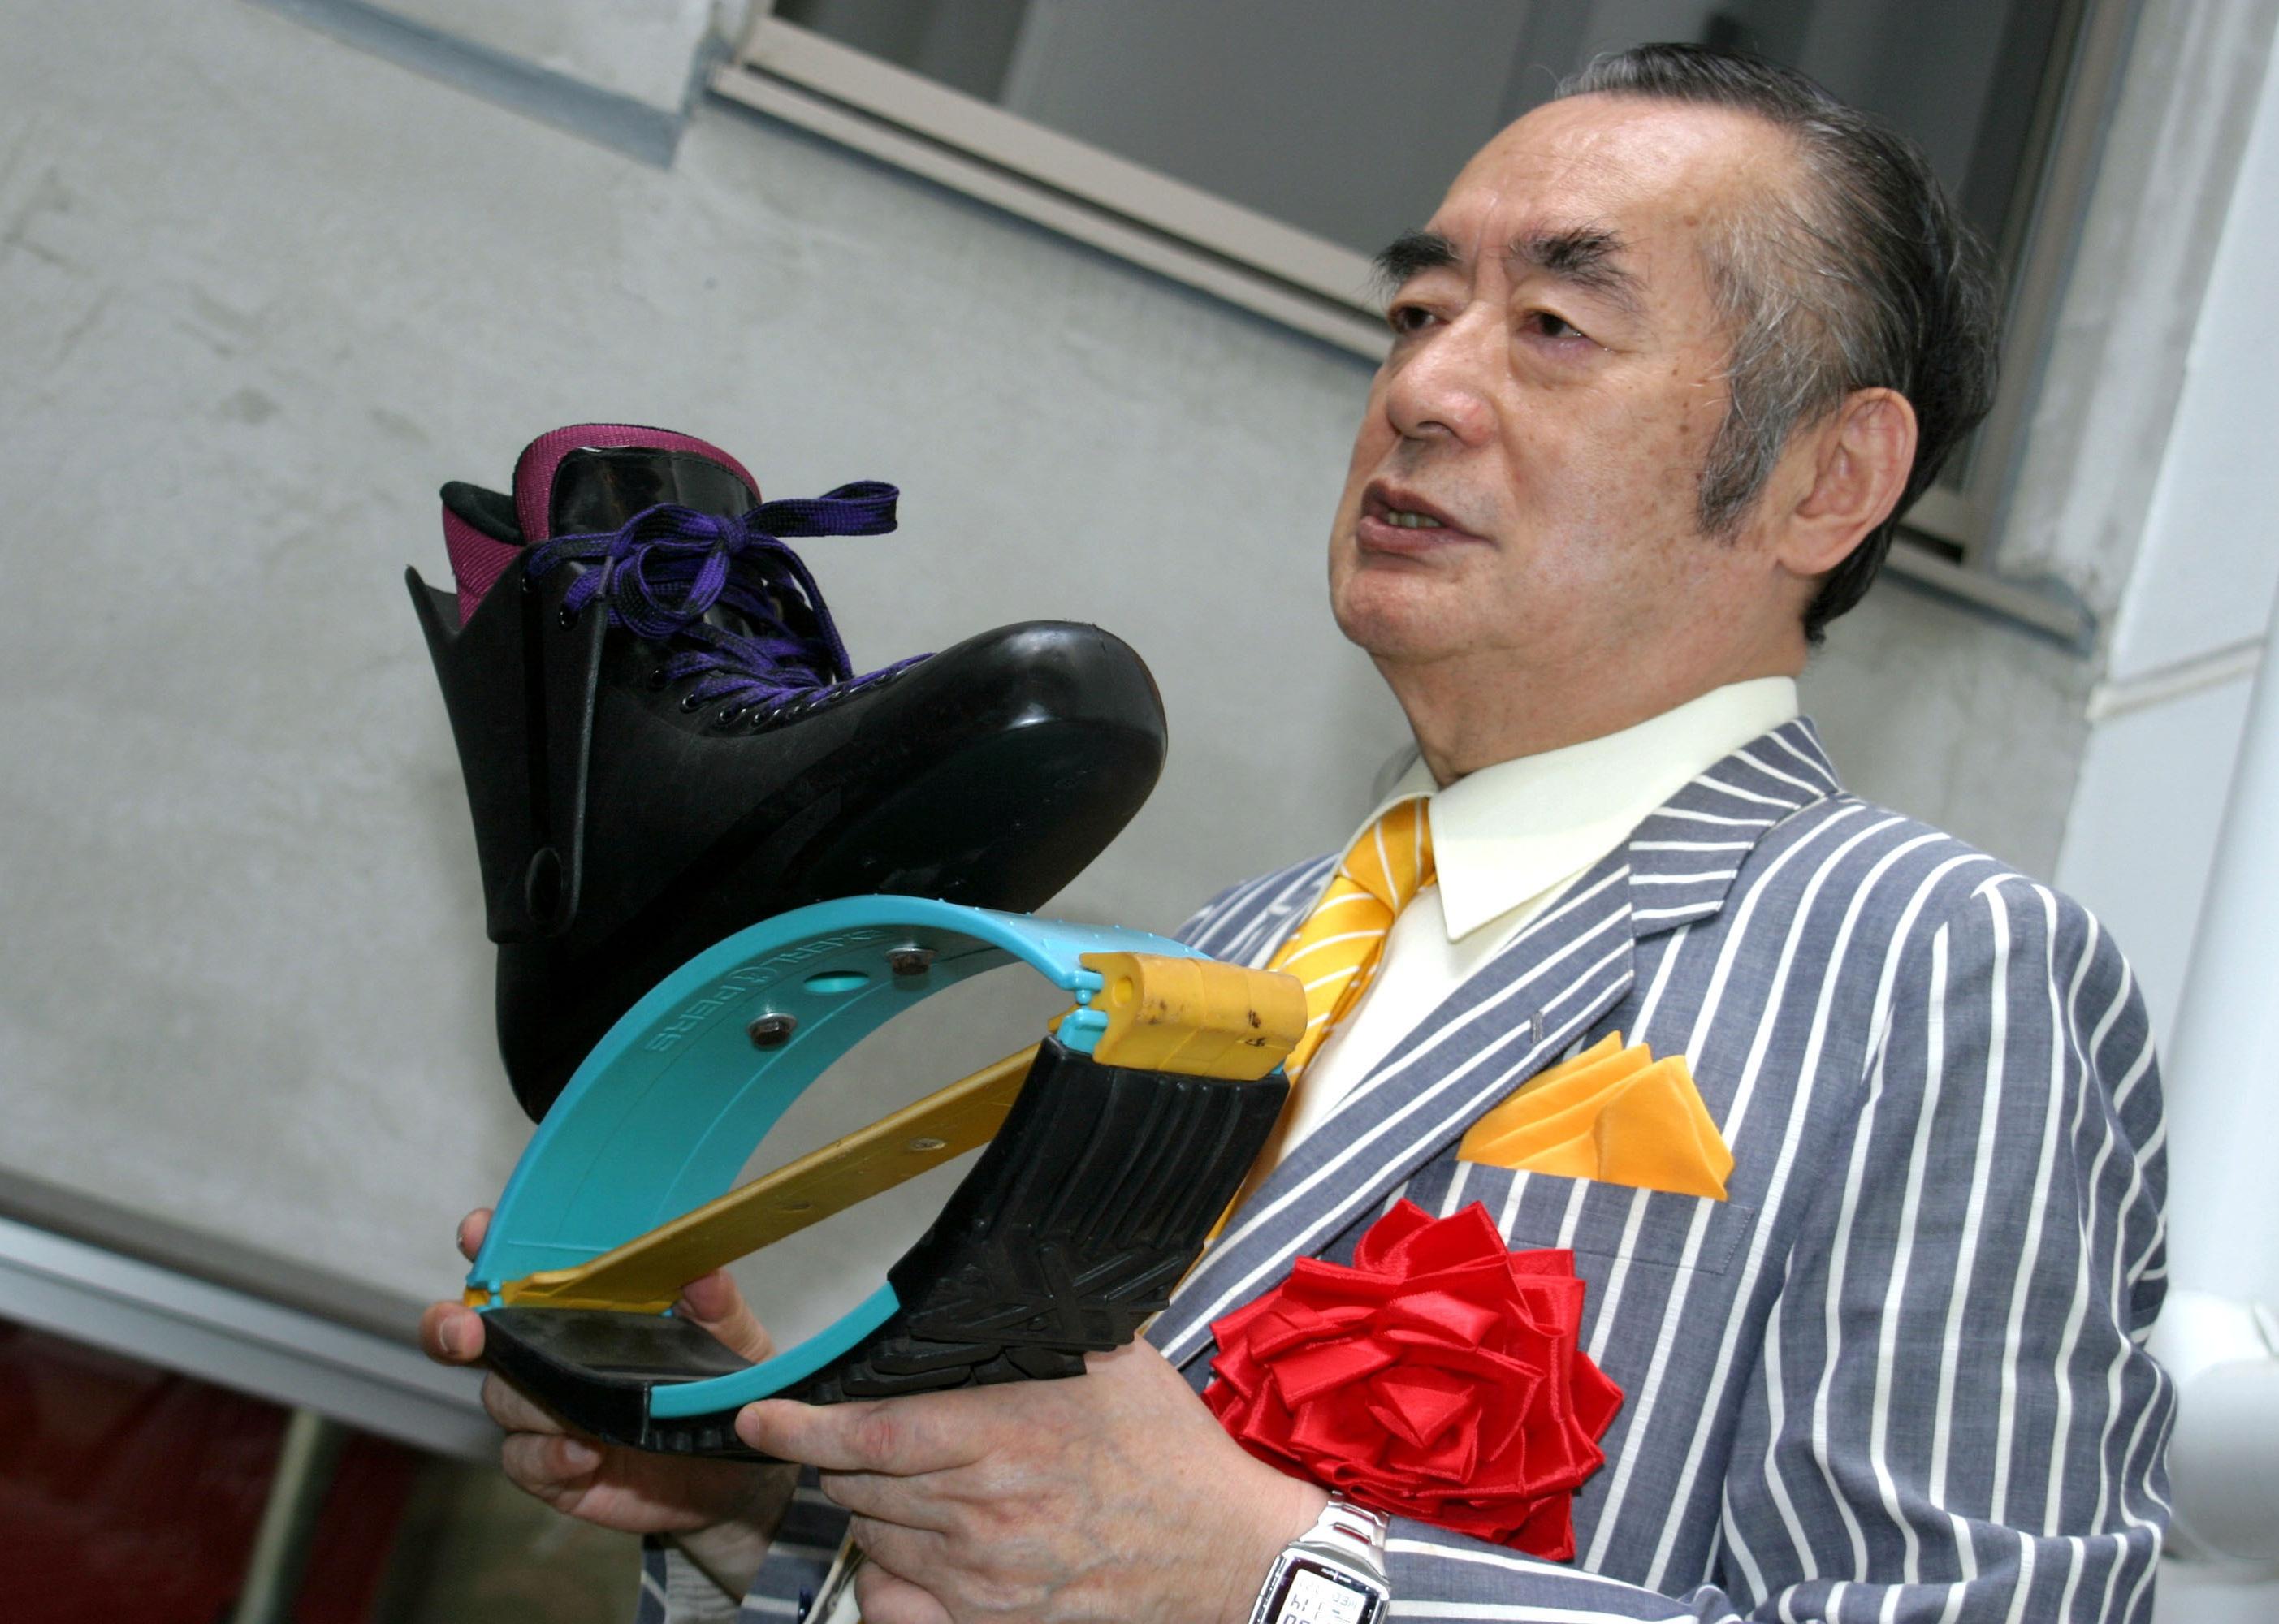 Yoshiro Nakamatsu, wearing a gray pinstripe suit with a yellow tie and red bow, holding a shoe invention.